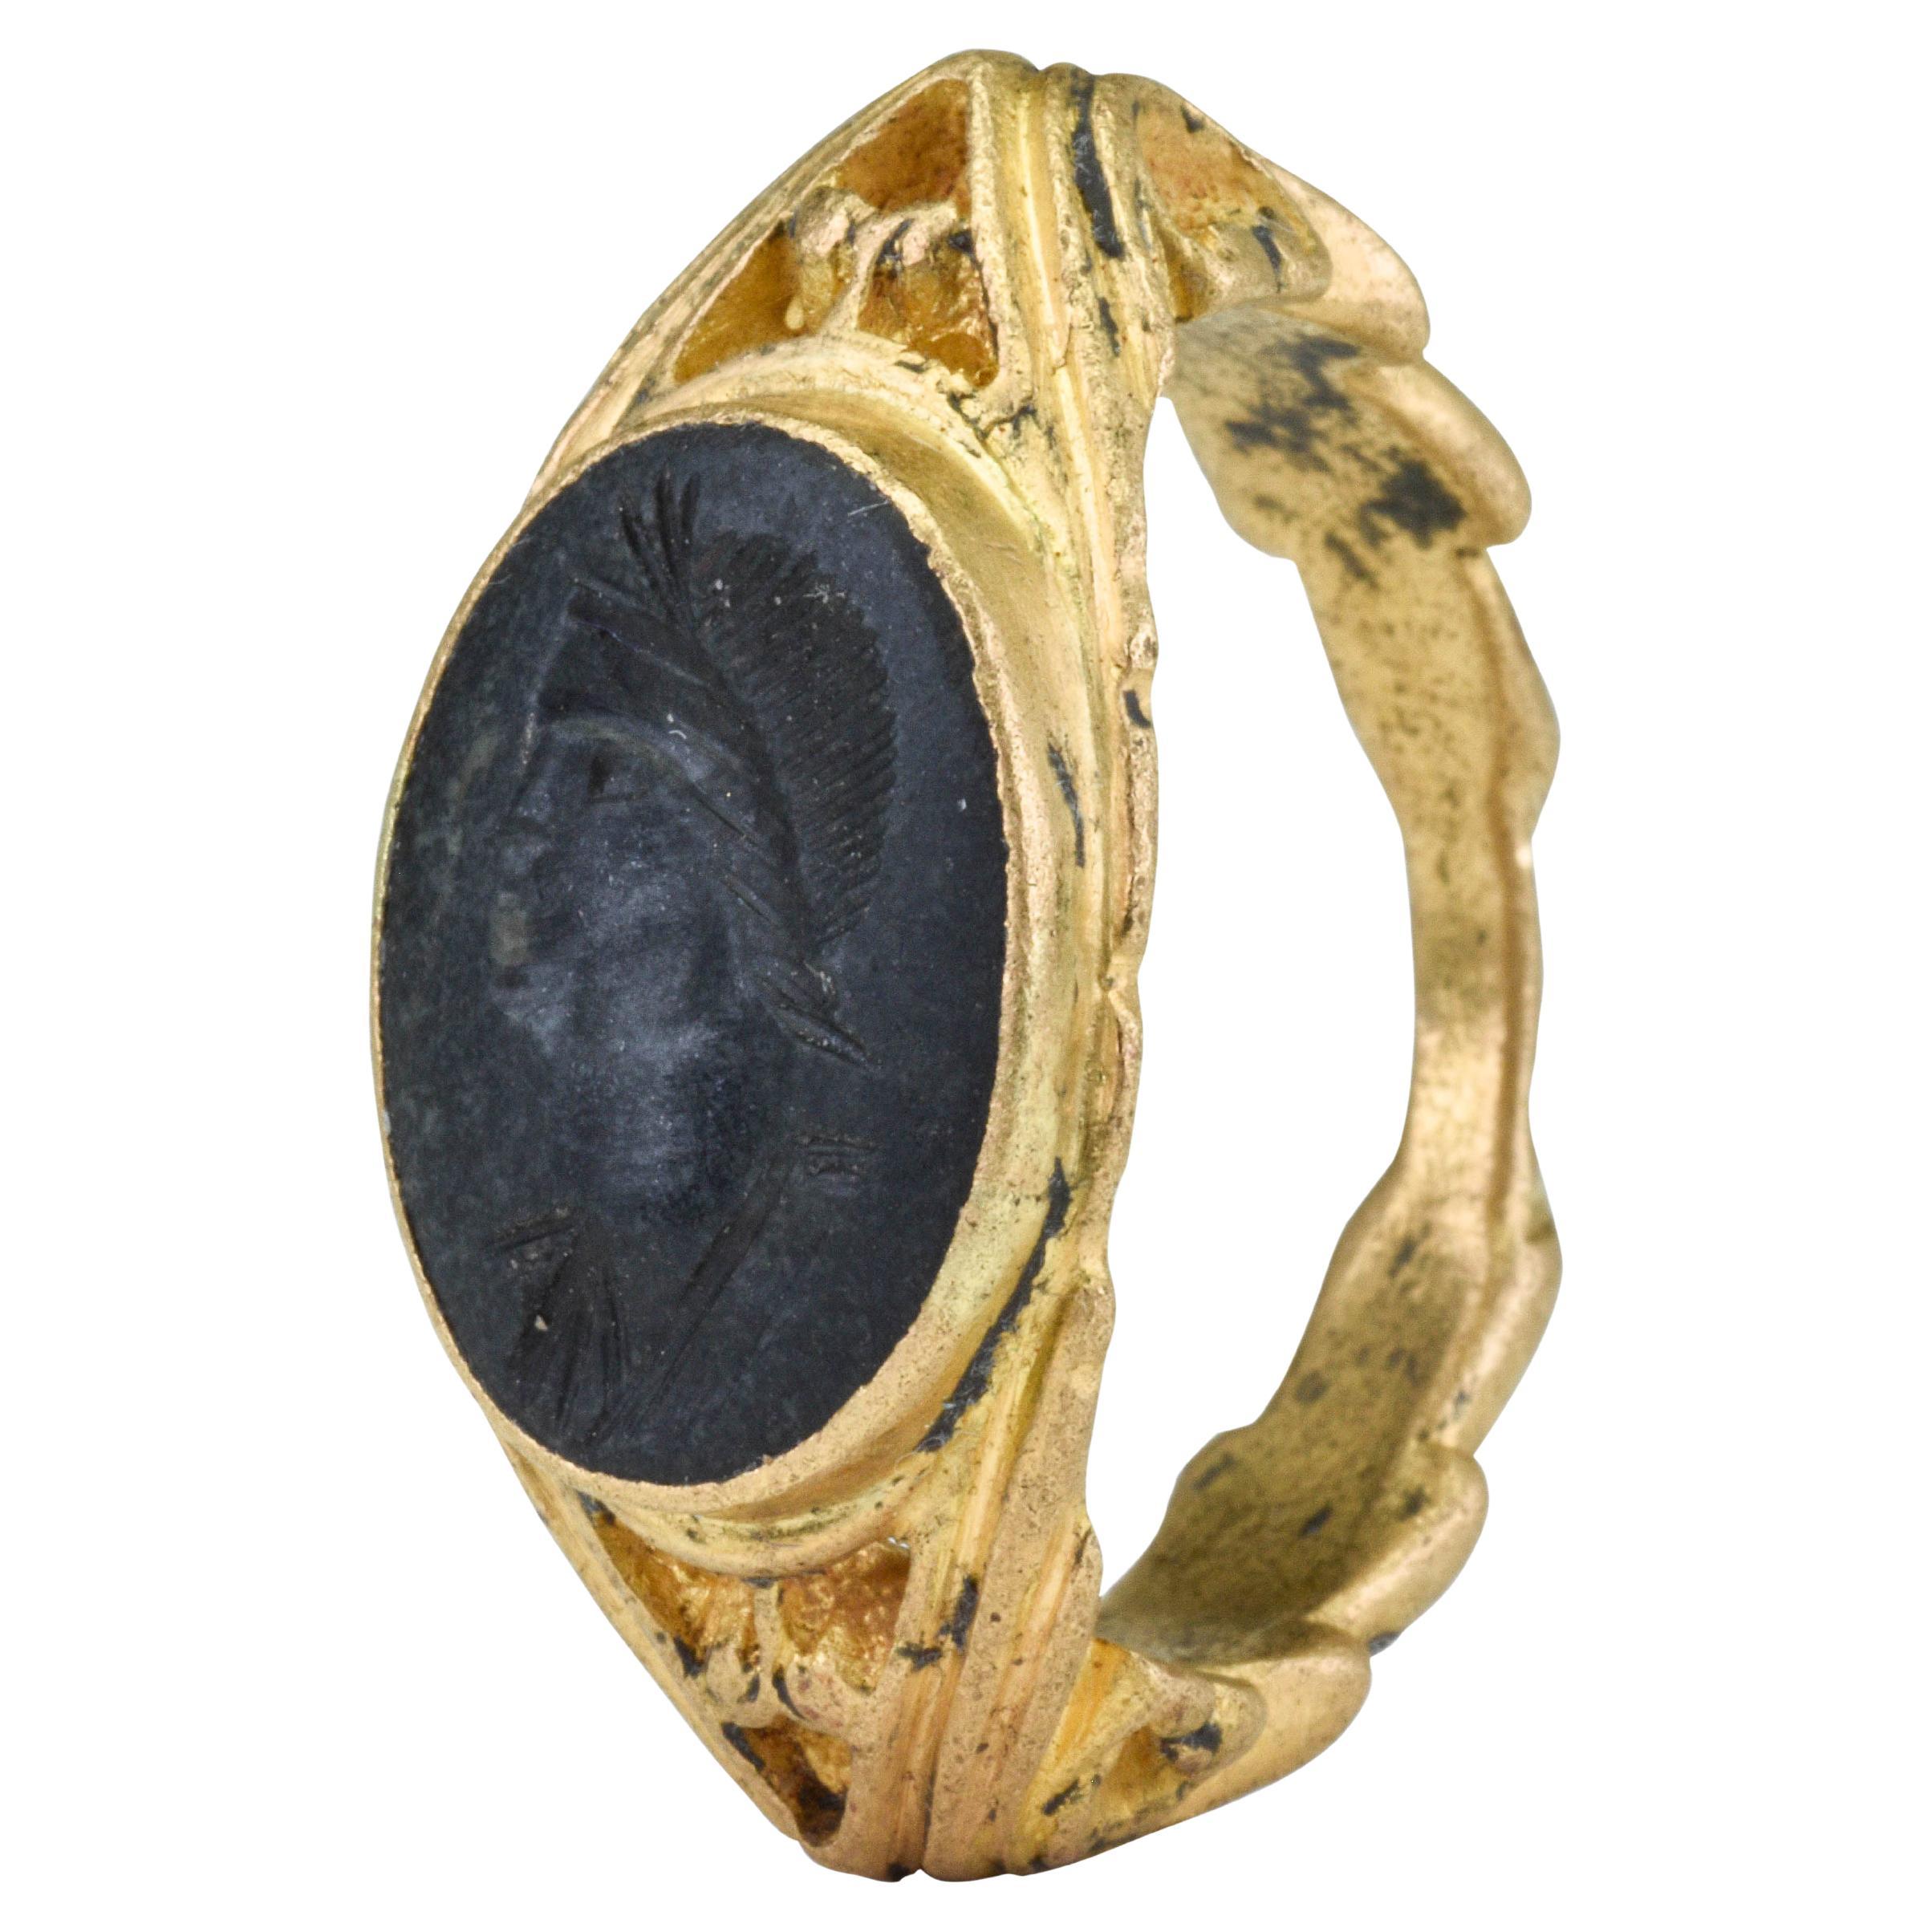 Ancient Ring - 170 For Sale on 1stDibs | ancient rings, choose an 